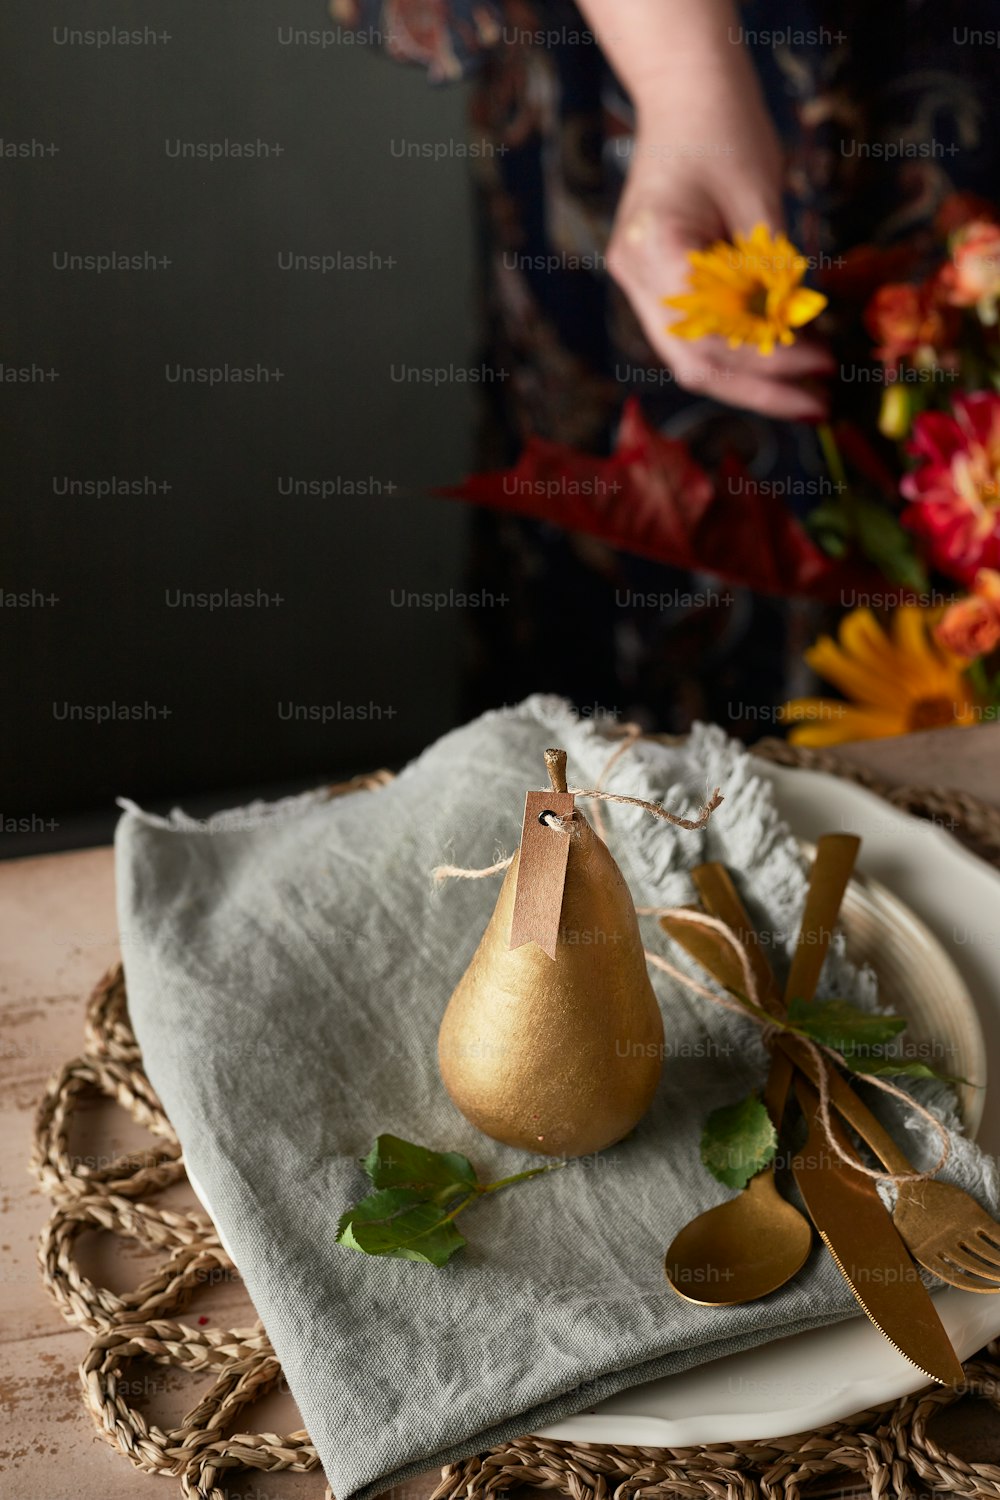 a plate with a pear on it next to a vase of flowers